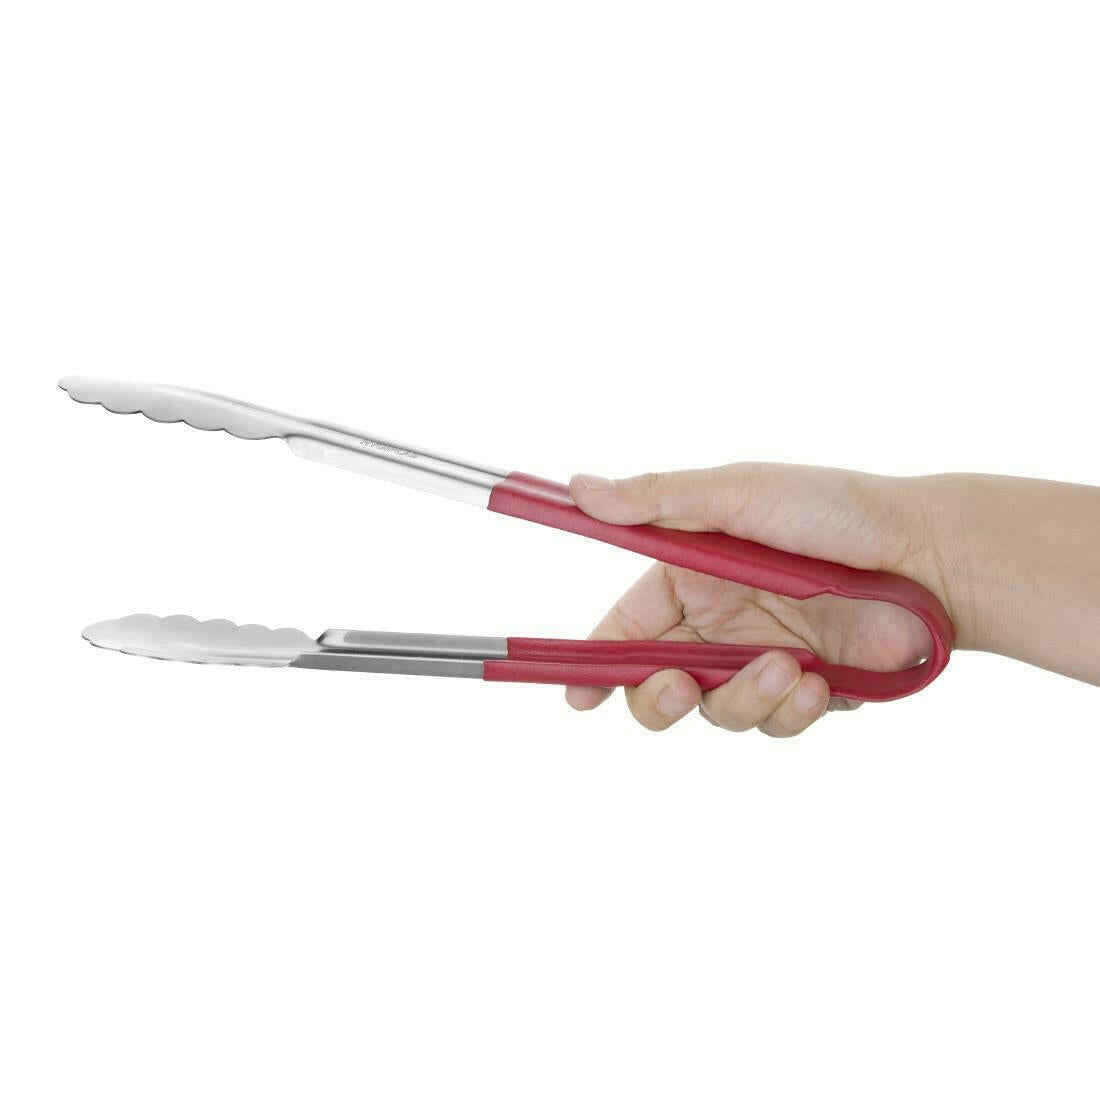 Hygiplas Colour Coded Red Serving Tongs 300mm